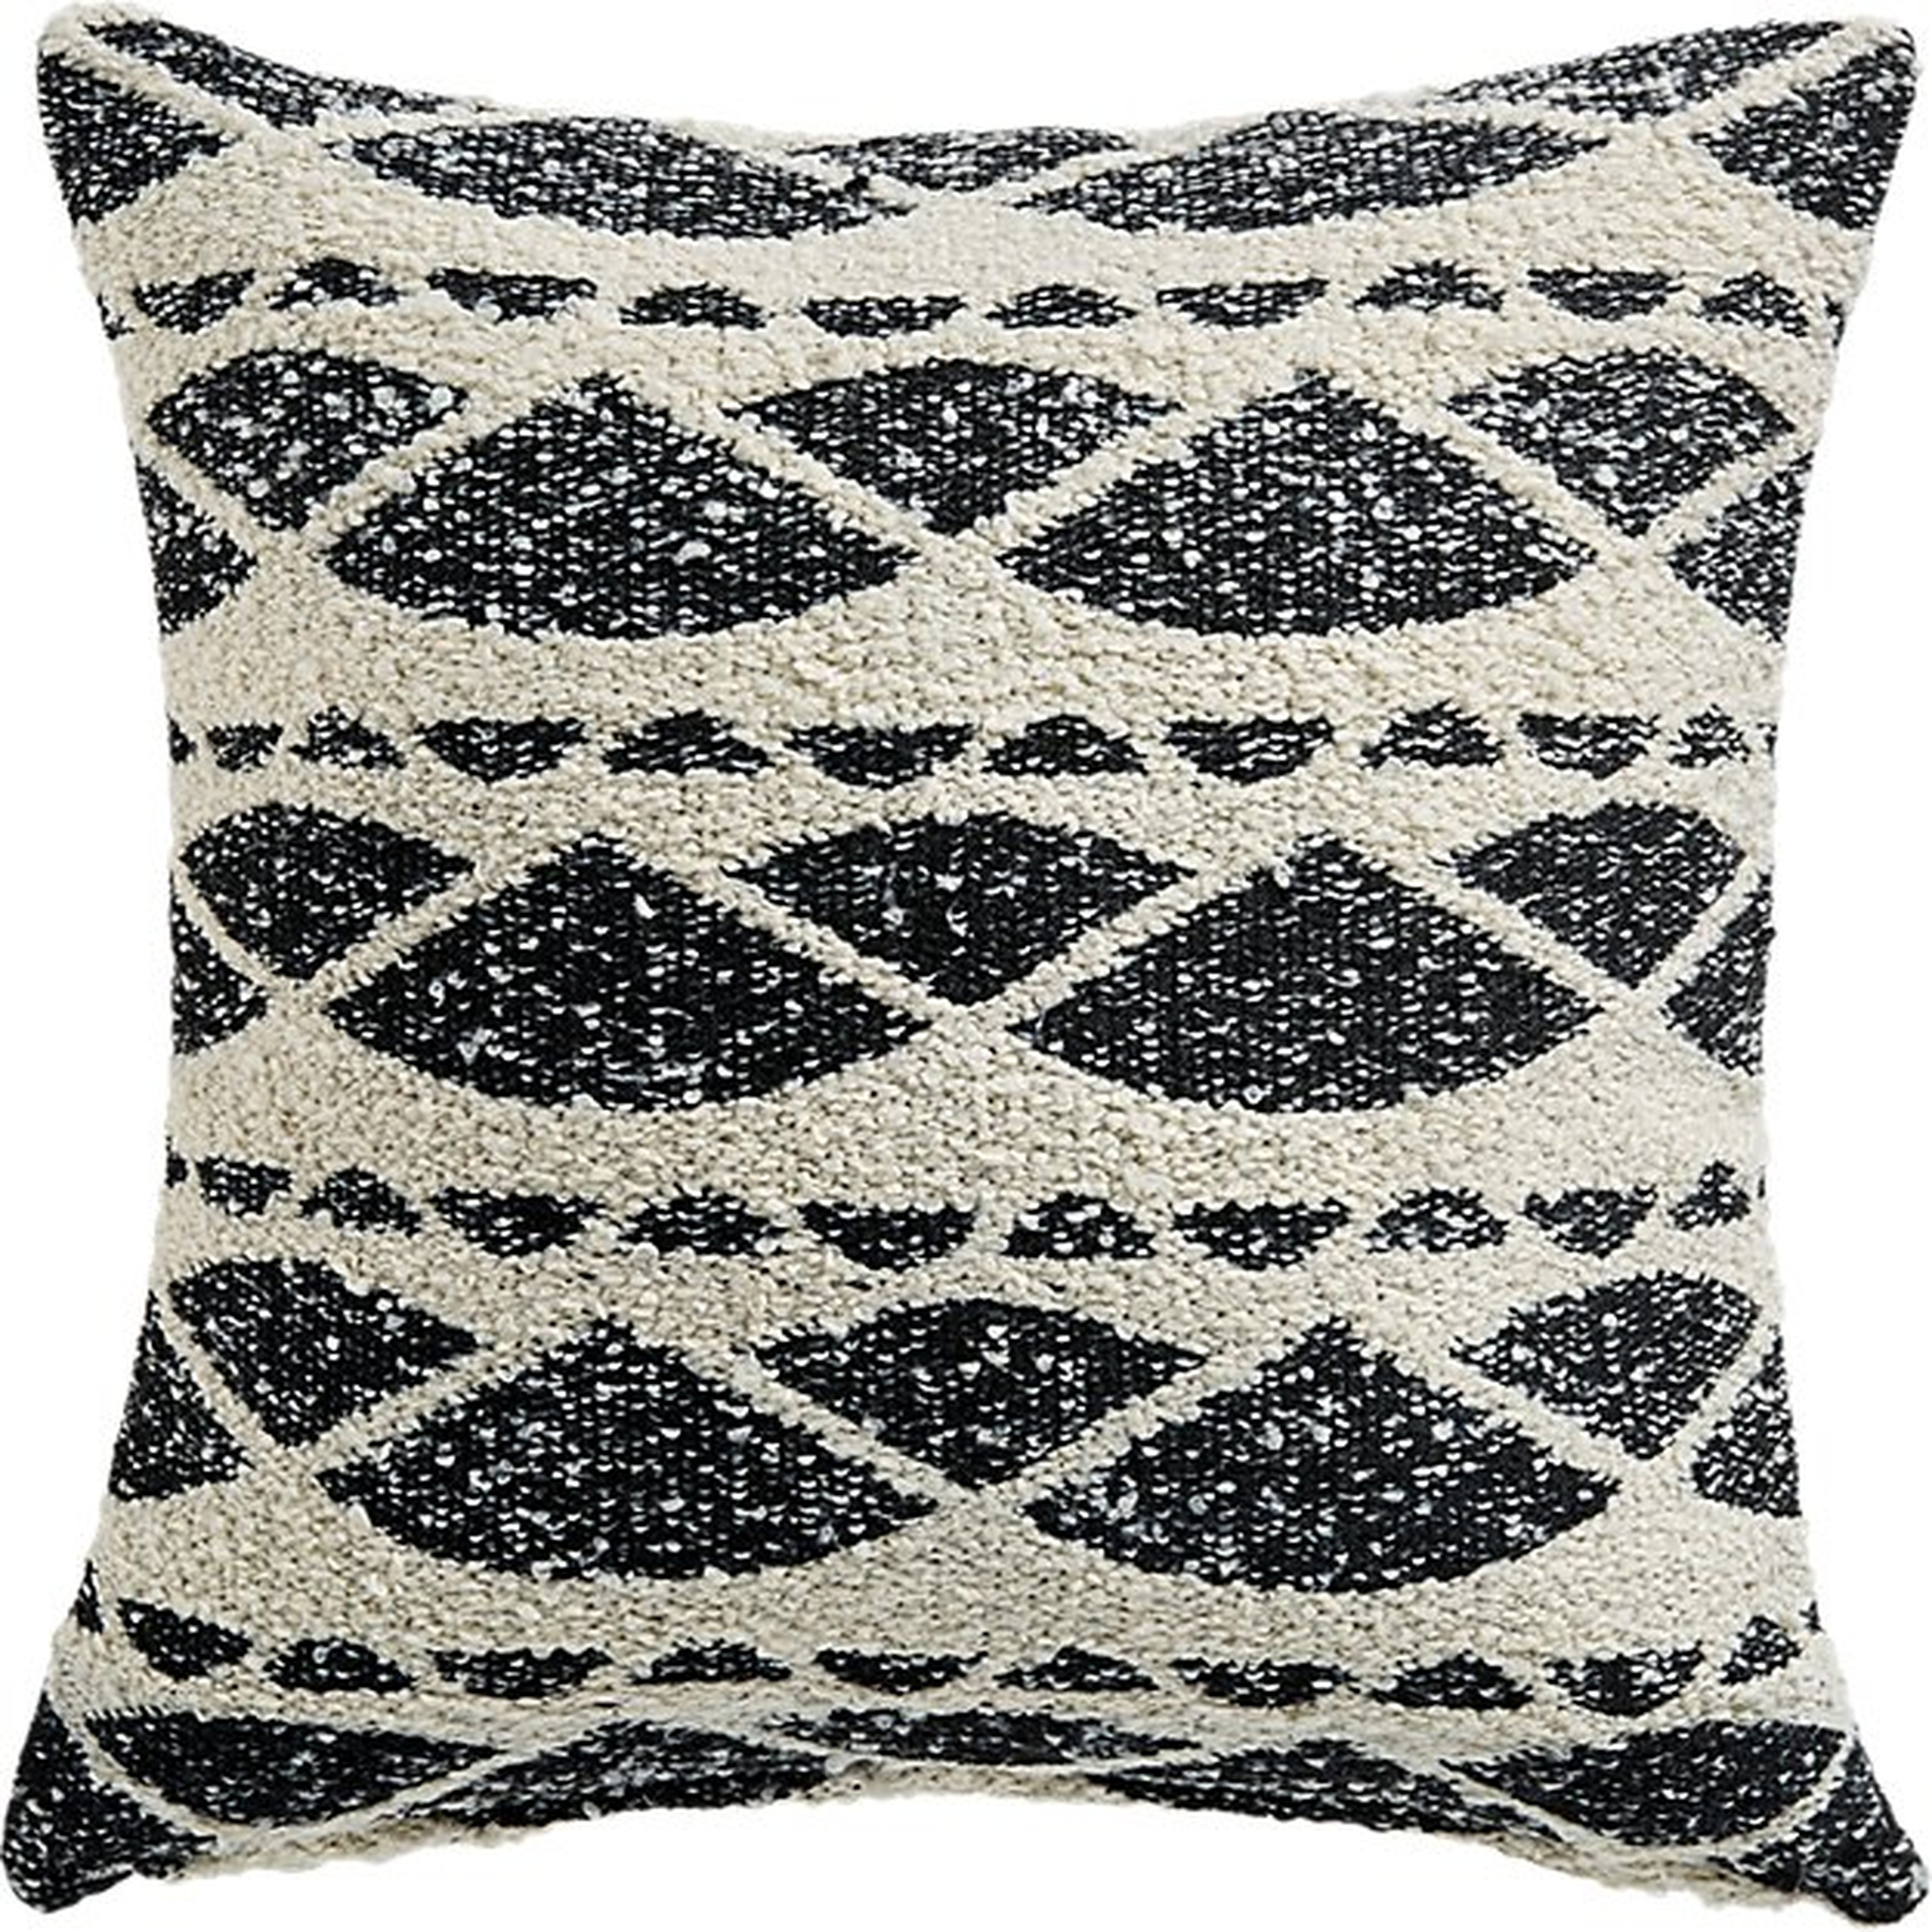 23" HAZEL BLACK AND WHITE BOUCLE PILLOW WITH DOWN-ALTERNATIVE INSERT - CB2